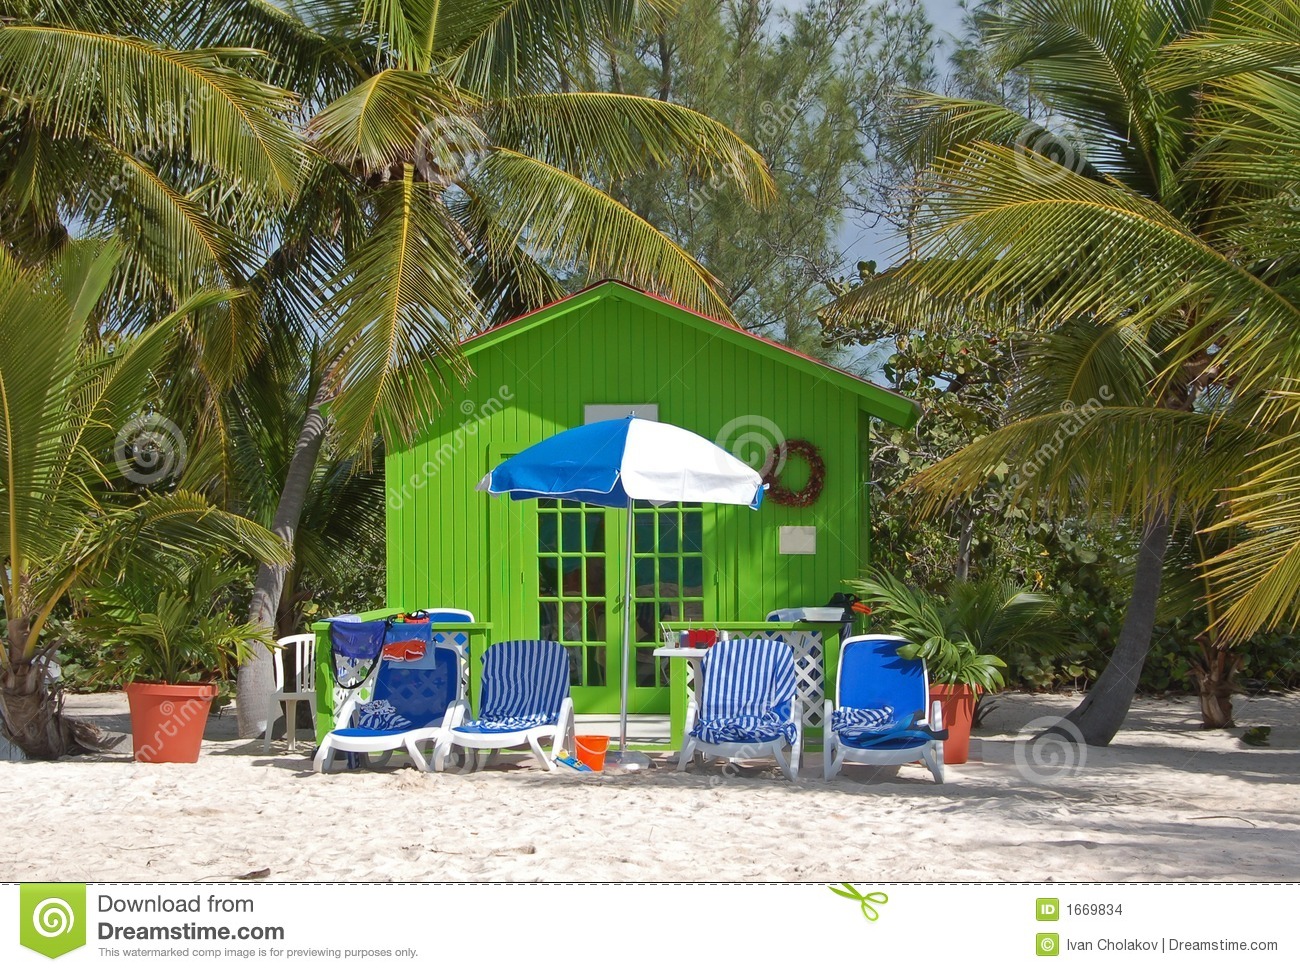 Relaxing Beach Escape In Small Green Bungalow Stock Images   Image